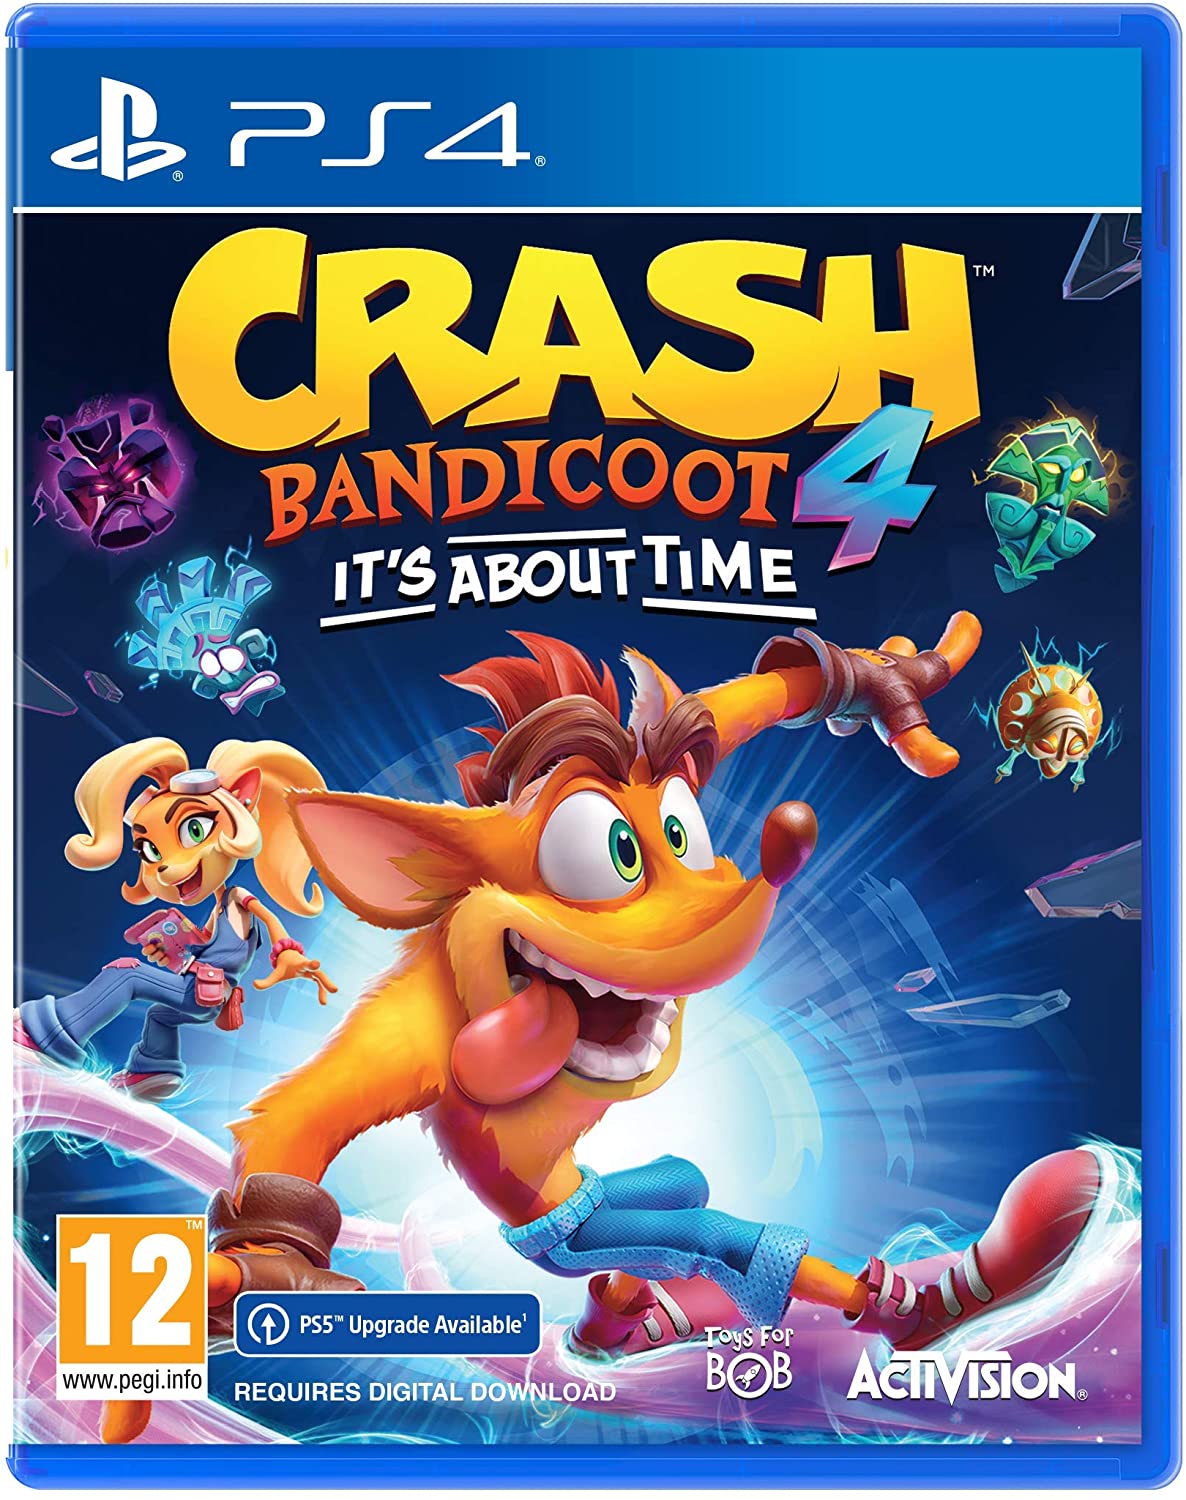 CRASH BANDCOOT PS4 GAME BRAND NEW WITH SEALED PACK. - saynama